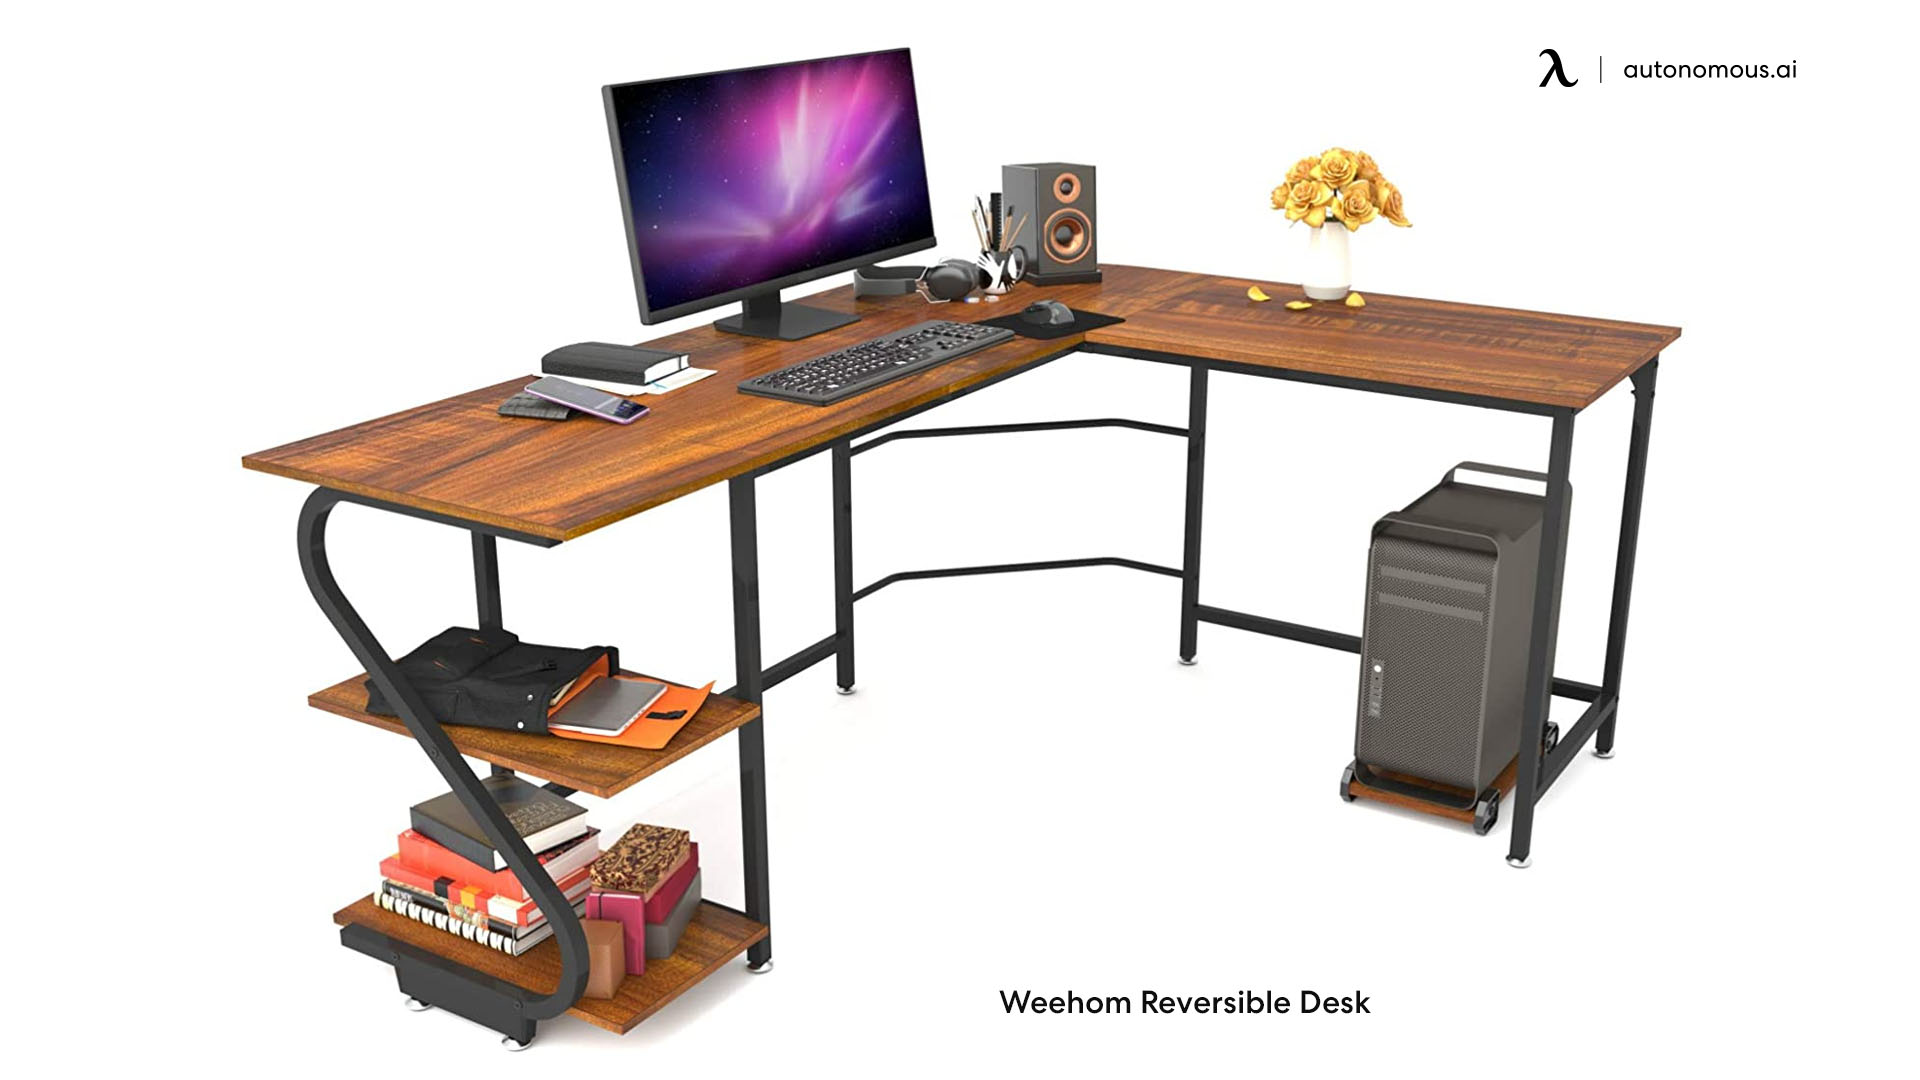 Weehom Reversible cheap computer desk with drawers